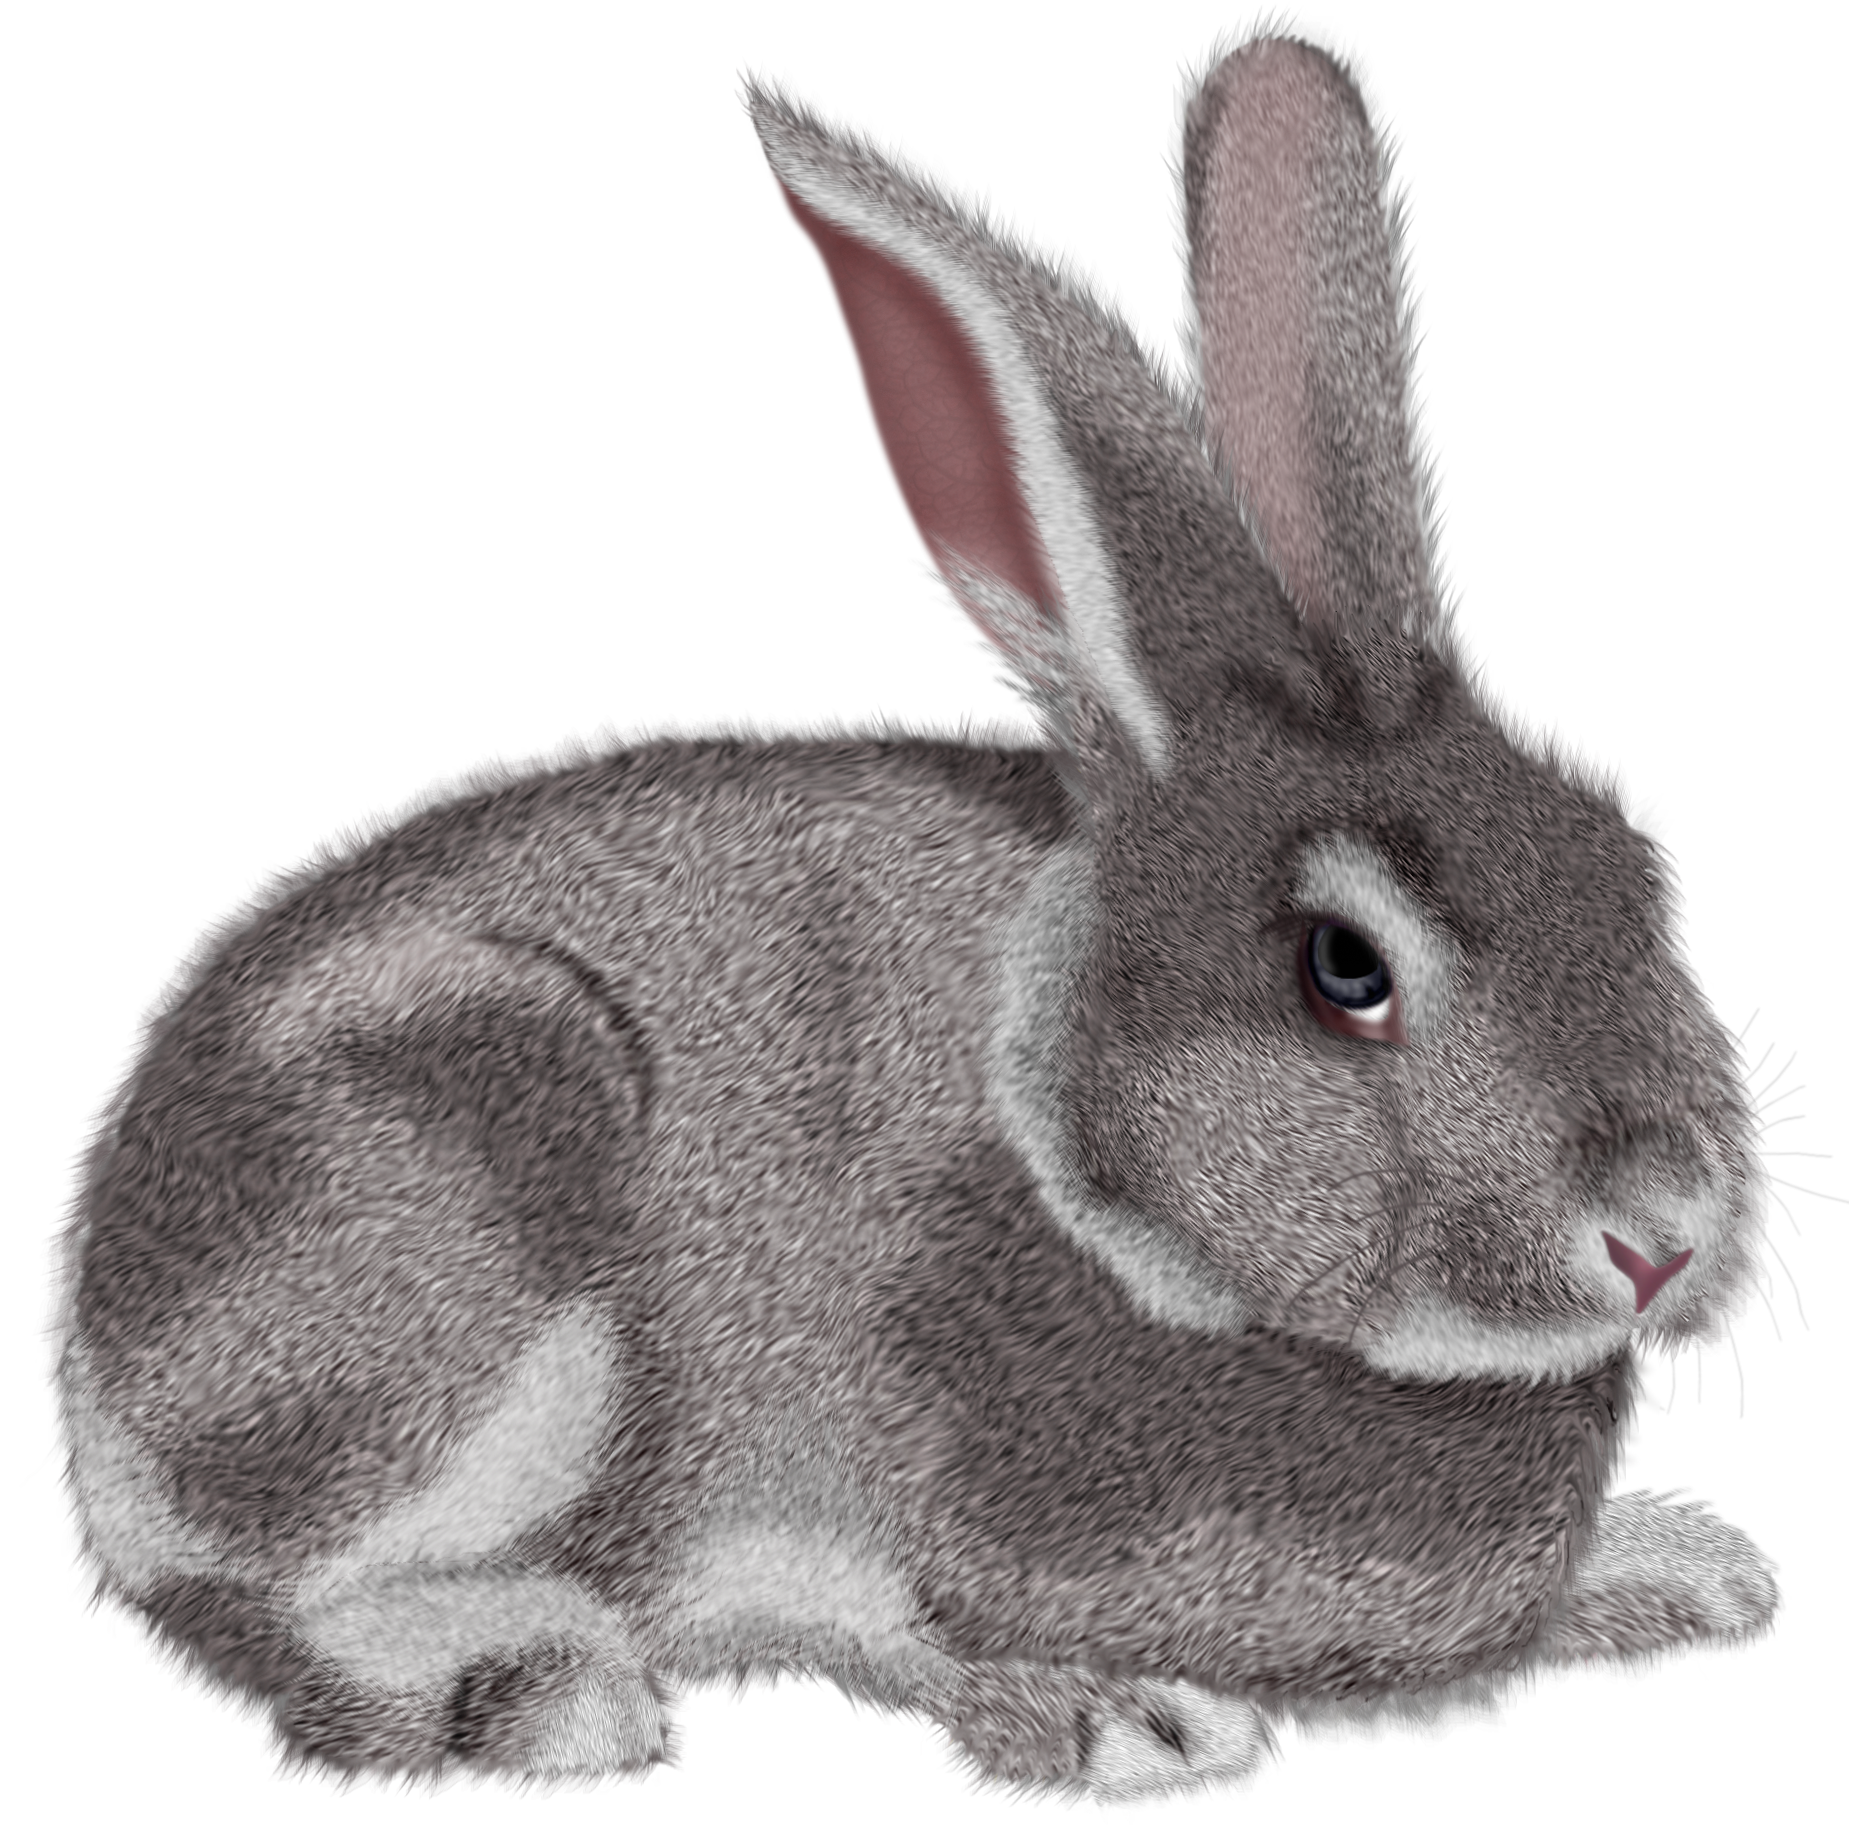 Grey Rabbit PNG Clipart Picture